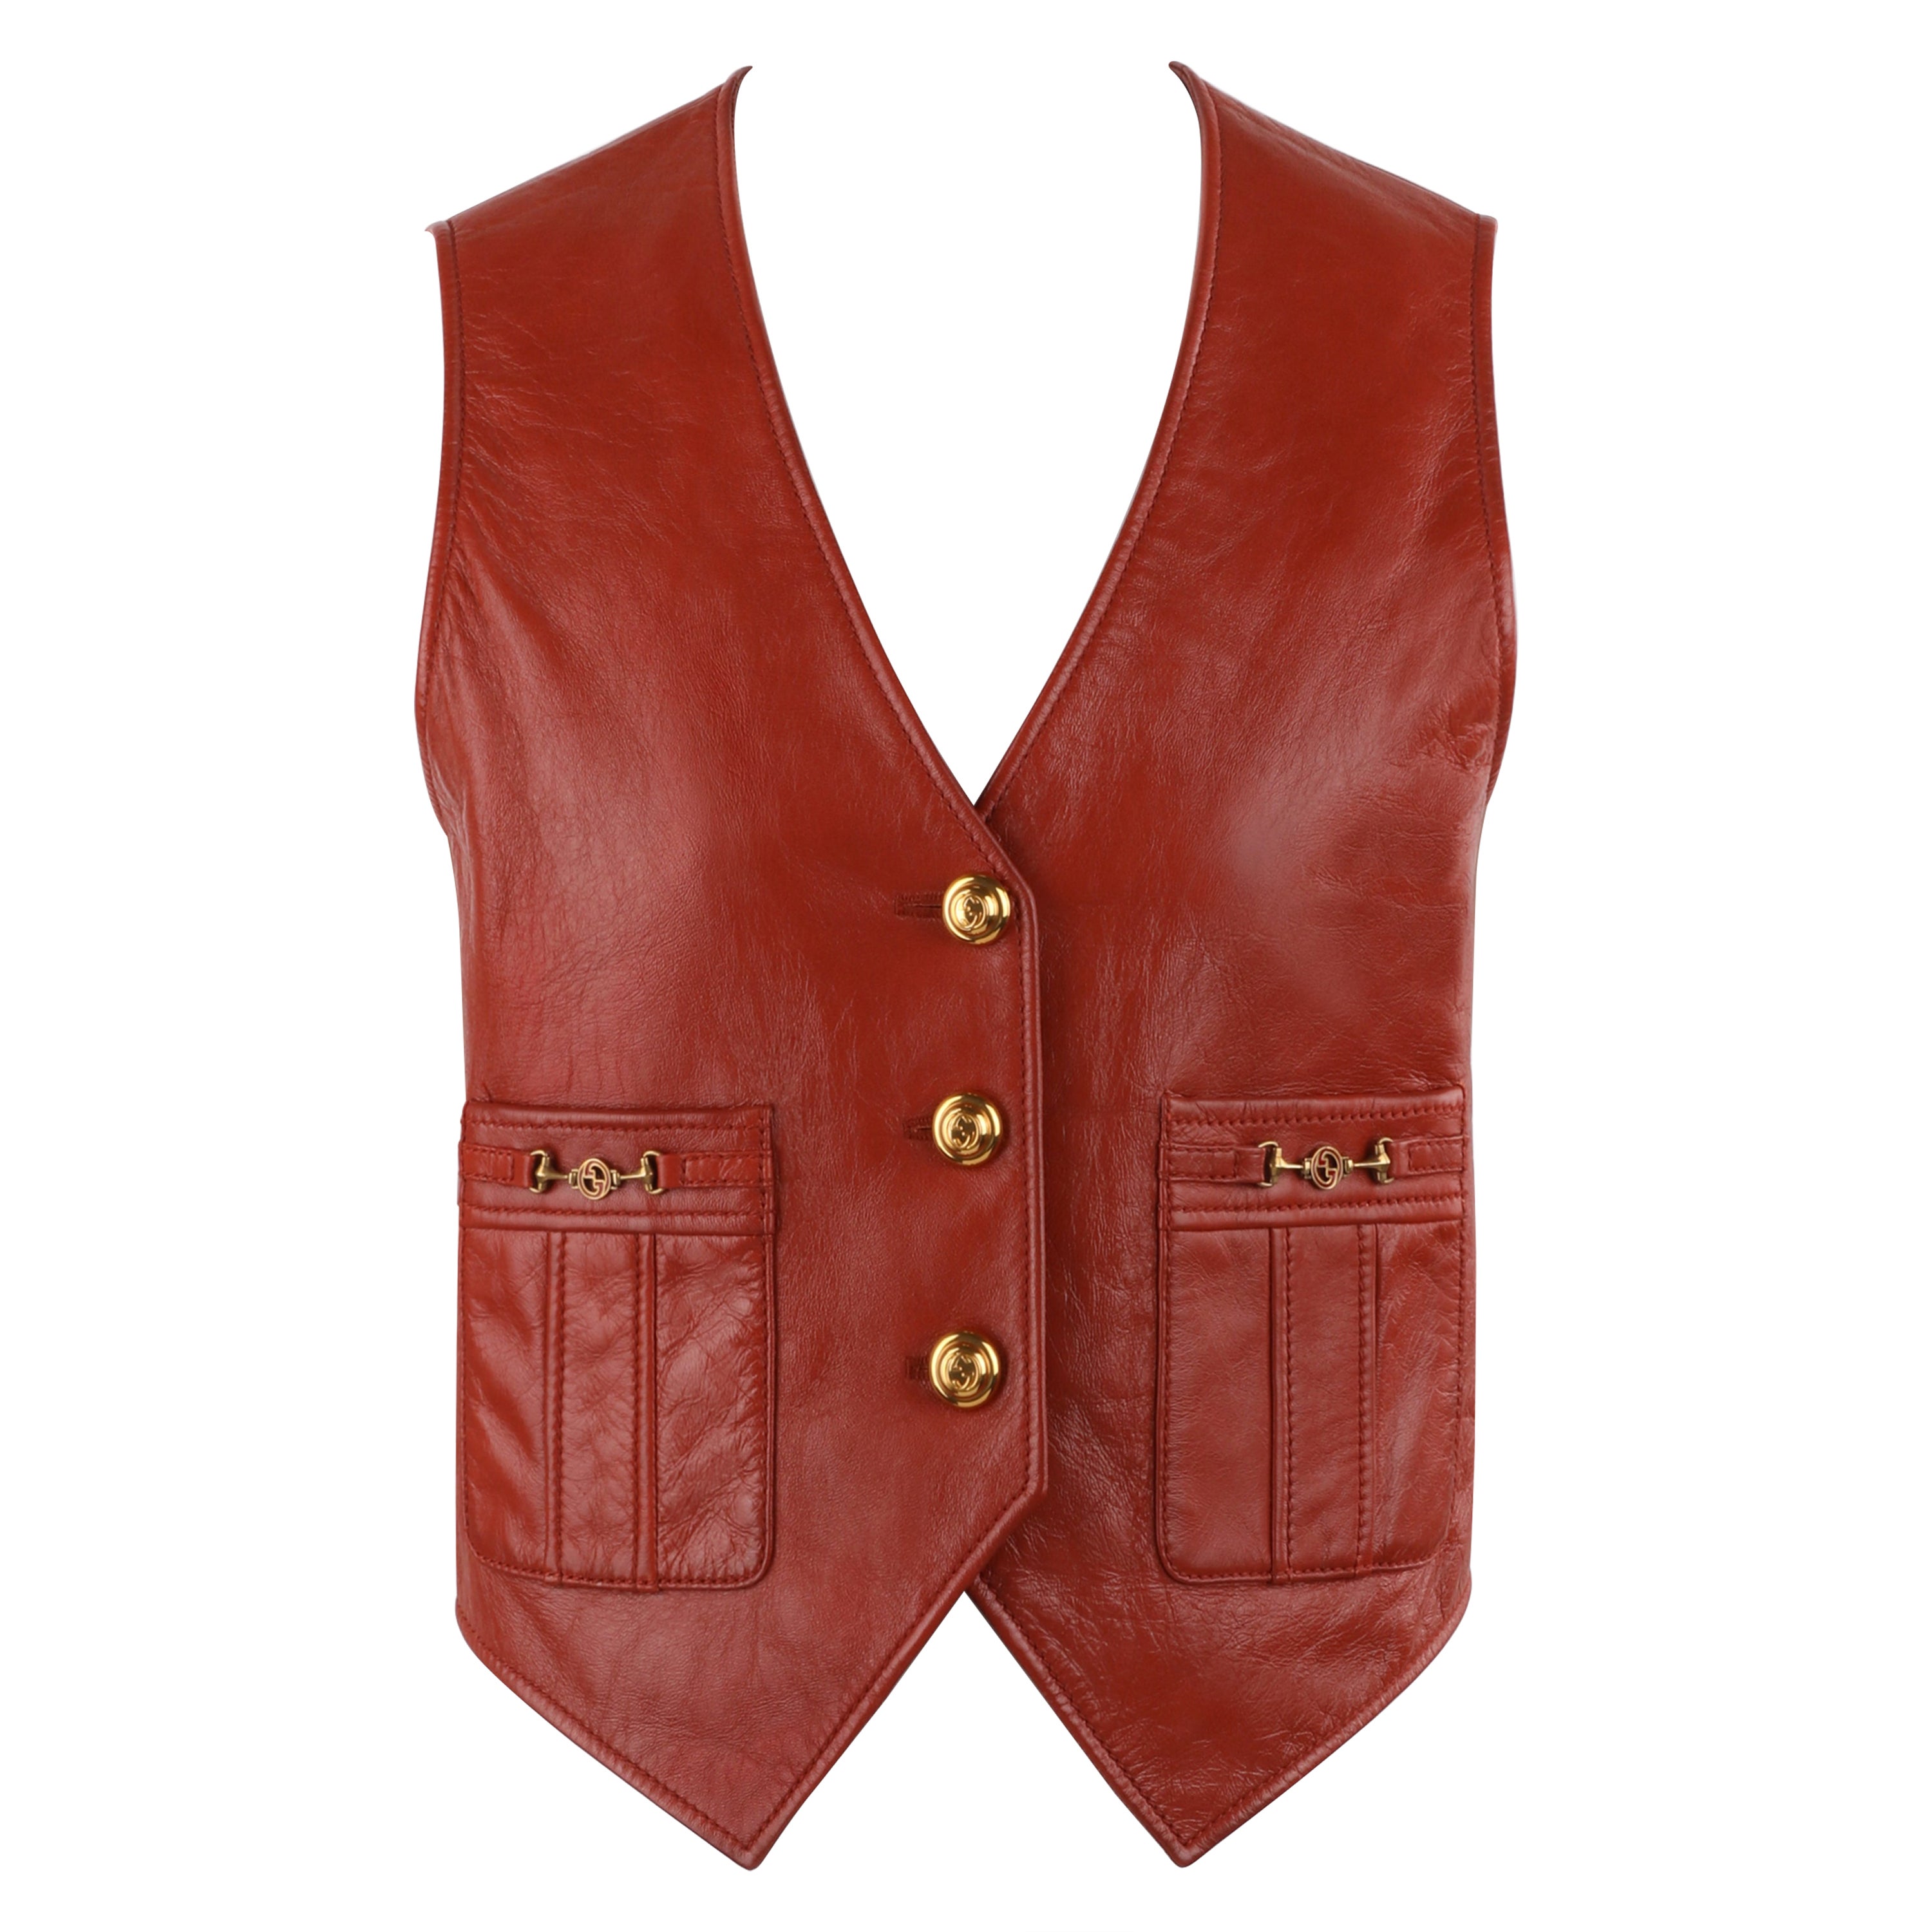 Gucci Pre-Fall 2019 Brown Leather Gold Button Pocket Sleeveless Waistcoat Vest